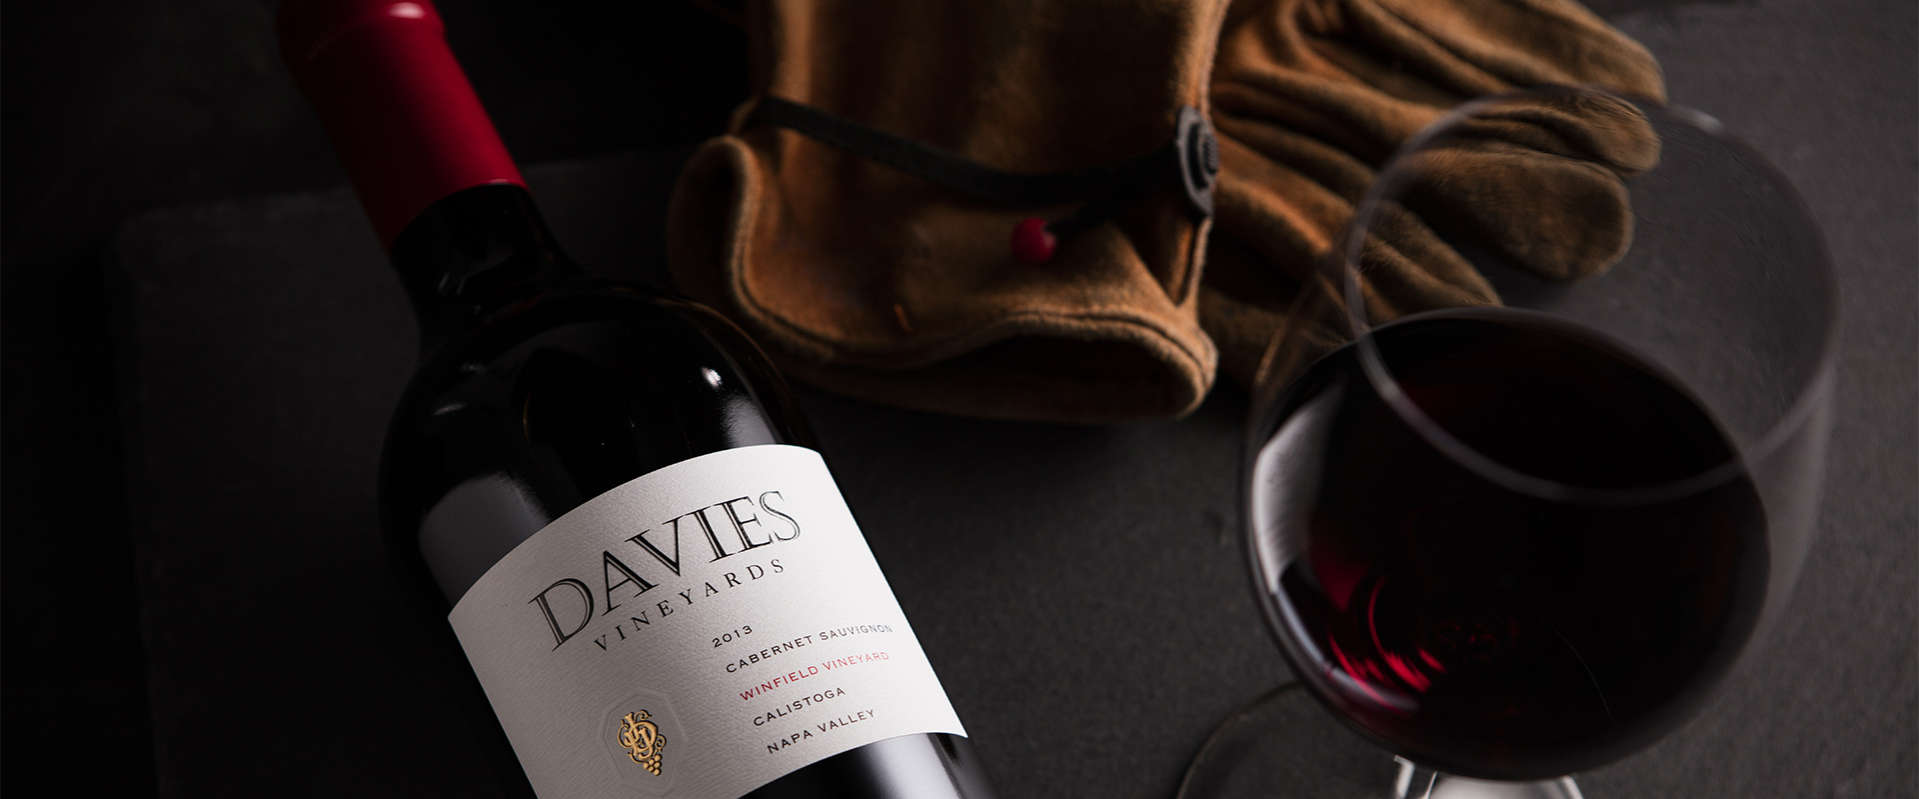 Davies Vineyards 2015 Winfield Vineyard Cabernet Sauvignon on a table with leather work gloves